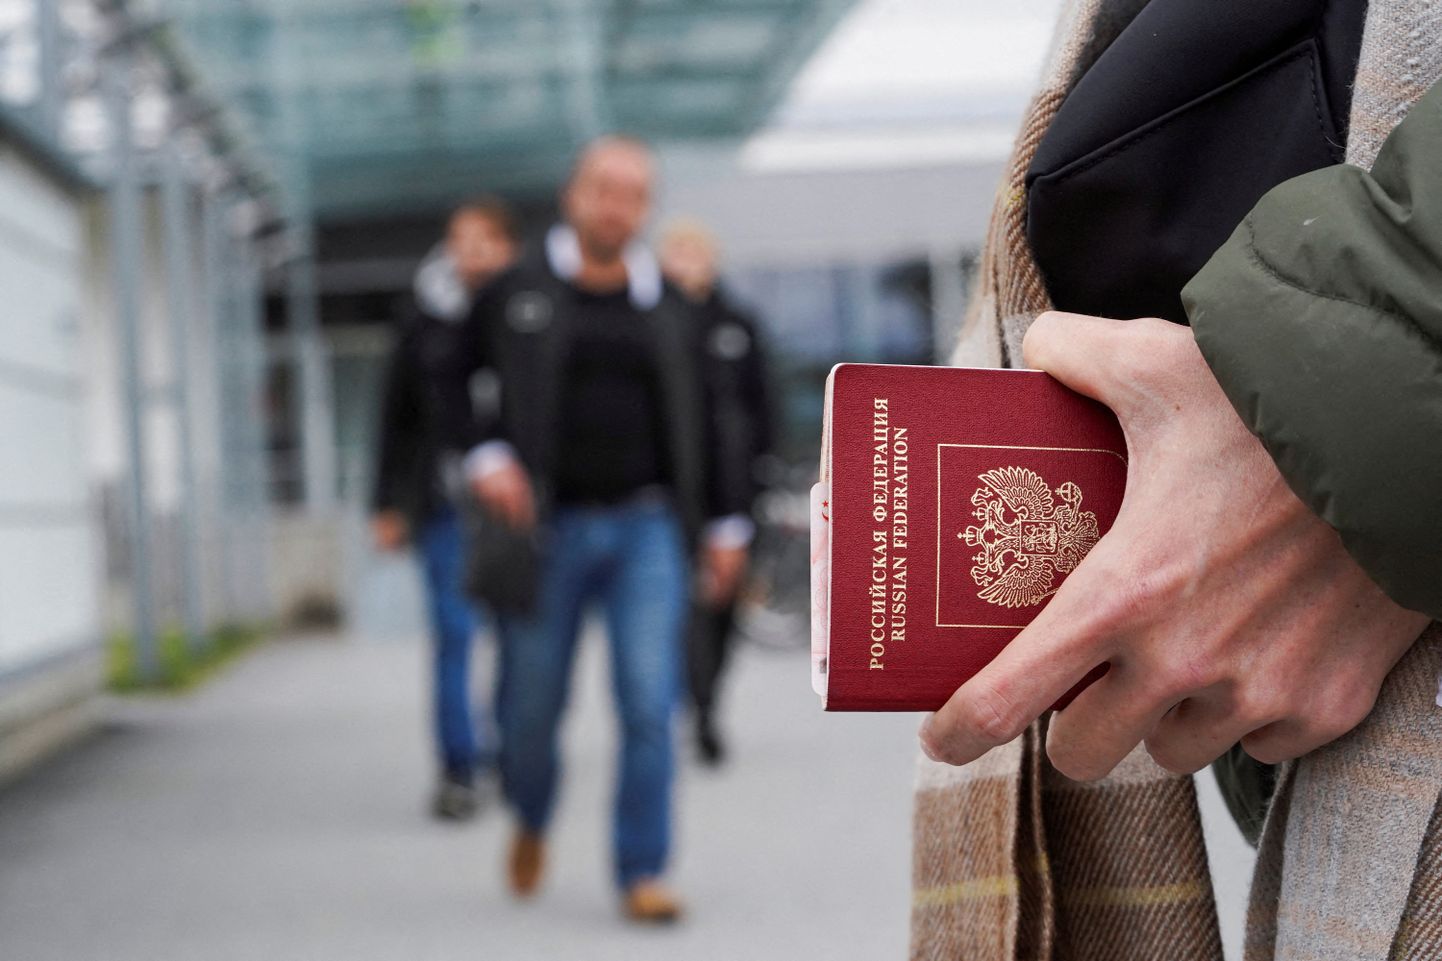 the acceptance of citizenship under favorable conditions offered by Russia broadens the options to expel people from Estonia.